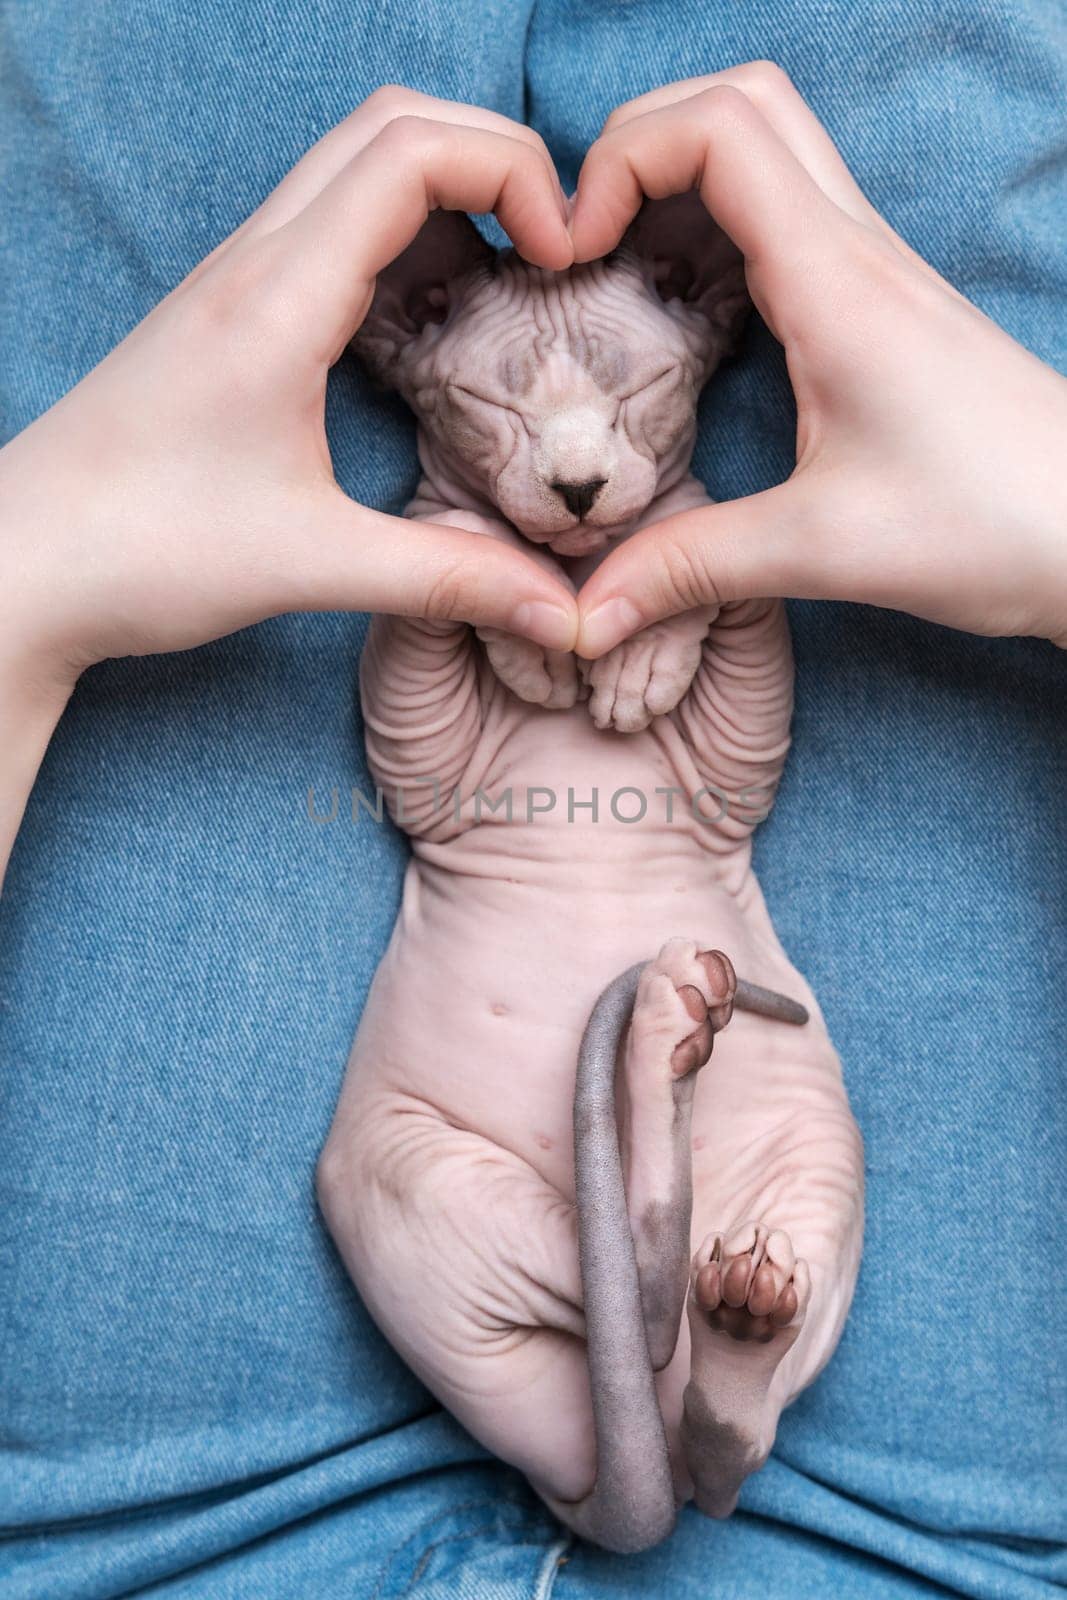 Two female hands making sign Heart by fingers in front of muzzle of sleeping kitten Canadian Sphynx Cat lying on its back on blue jeans.